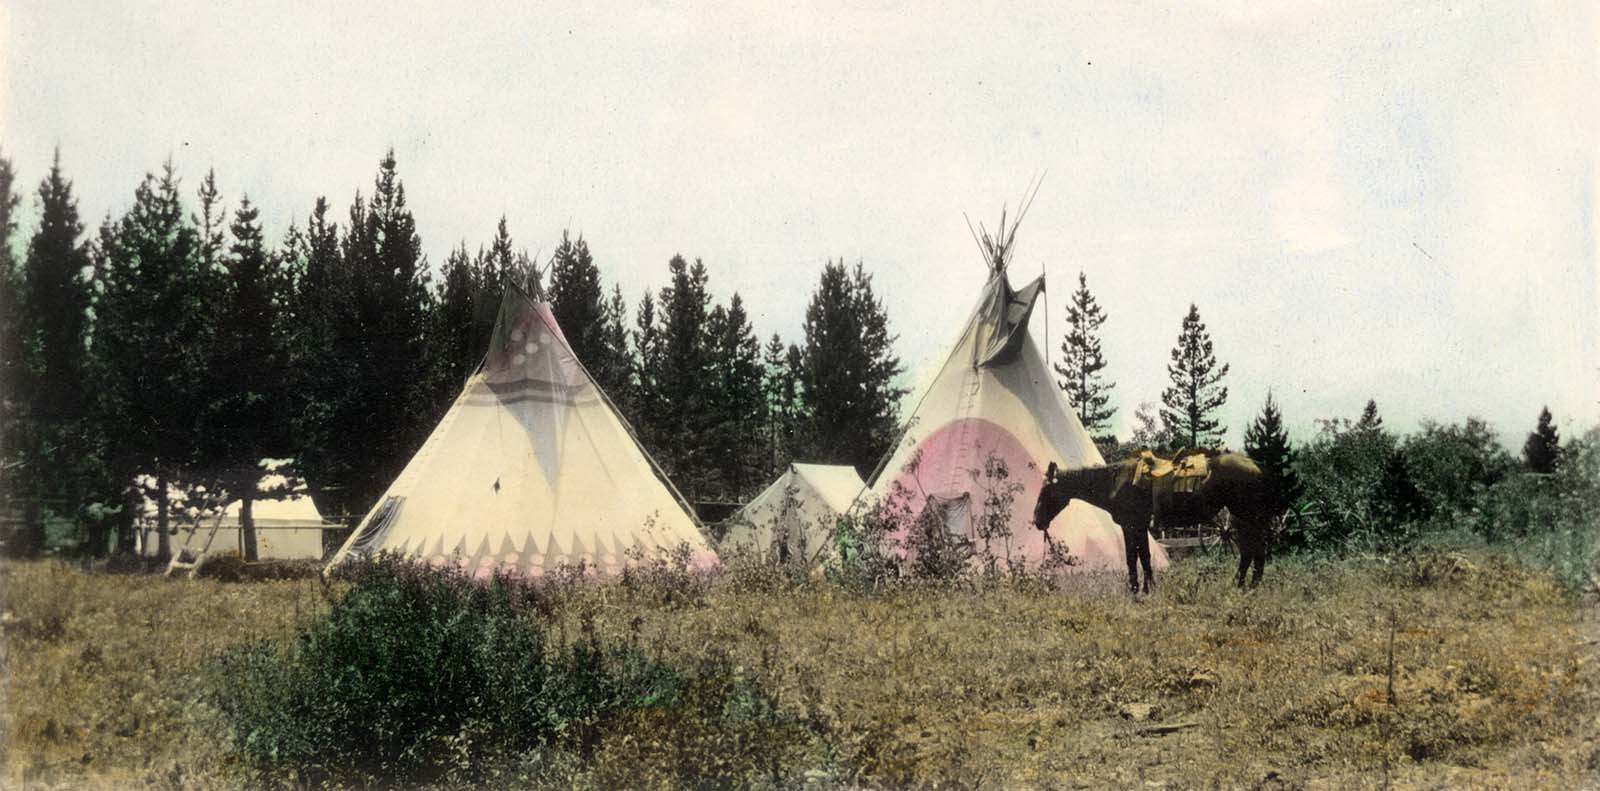 Horse grazes near tipi and tents, Glacier Park, MT. MS 320 Paul Dyck Plains Indian Buffalo Culture Collection, McCracken Research Library. P.320.139